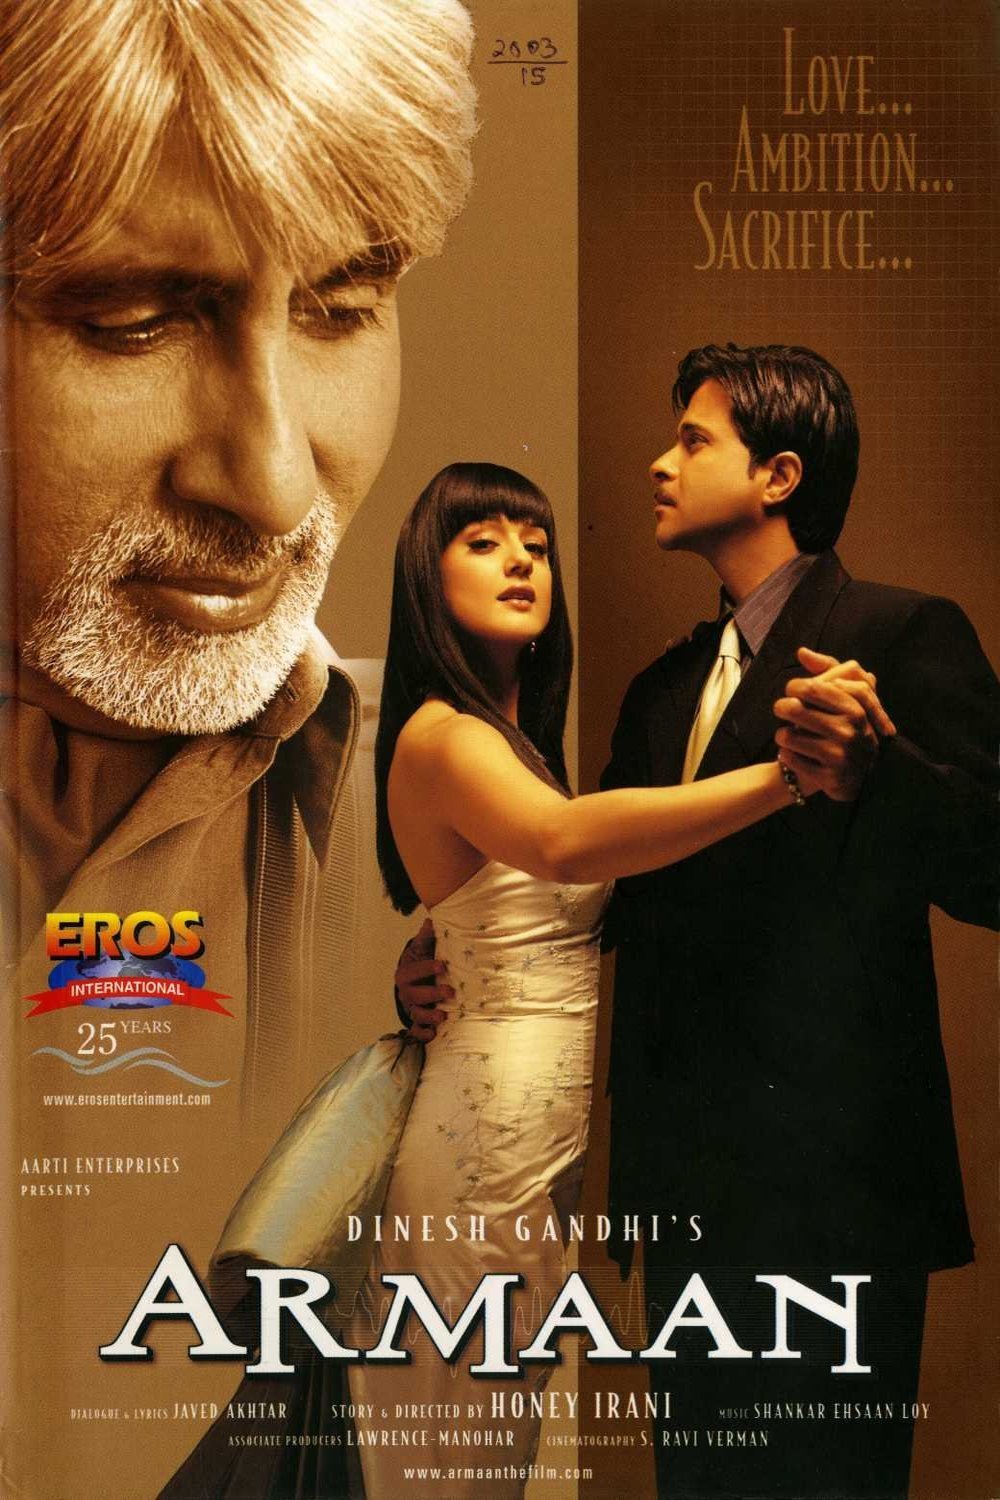 Hindi poster of the movie Armaan